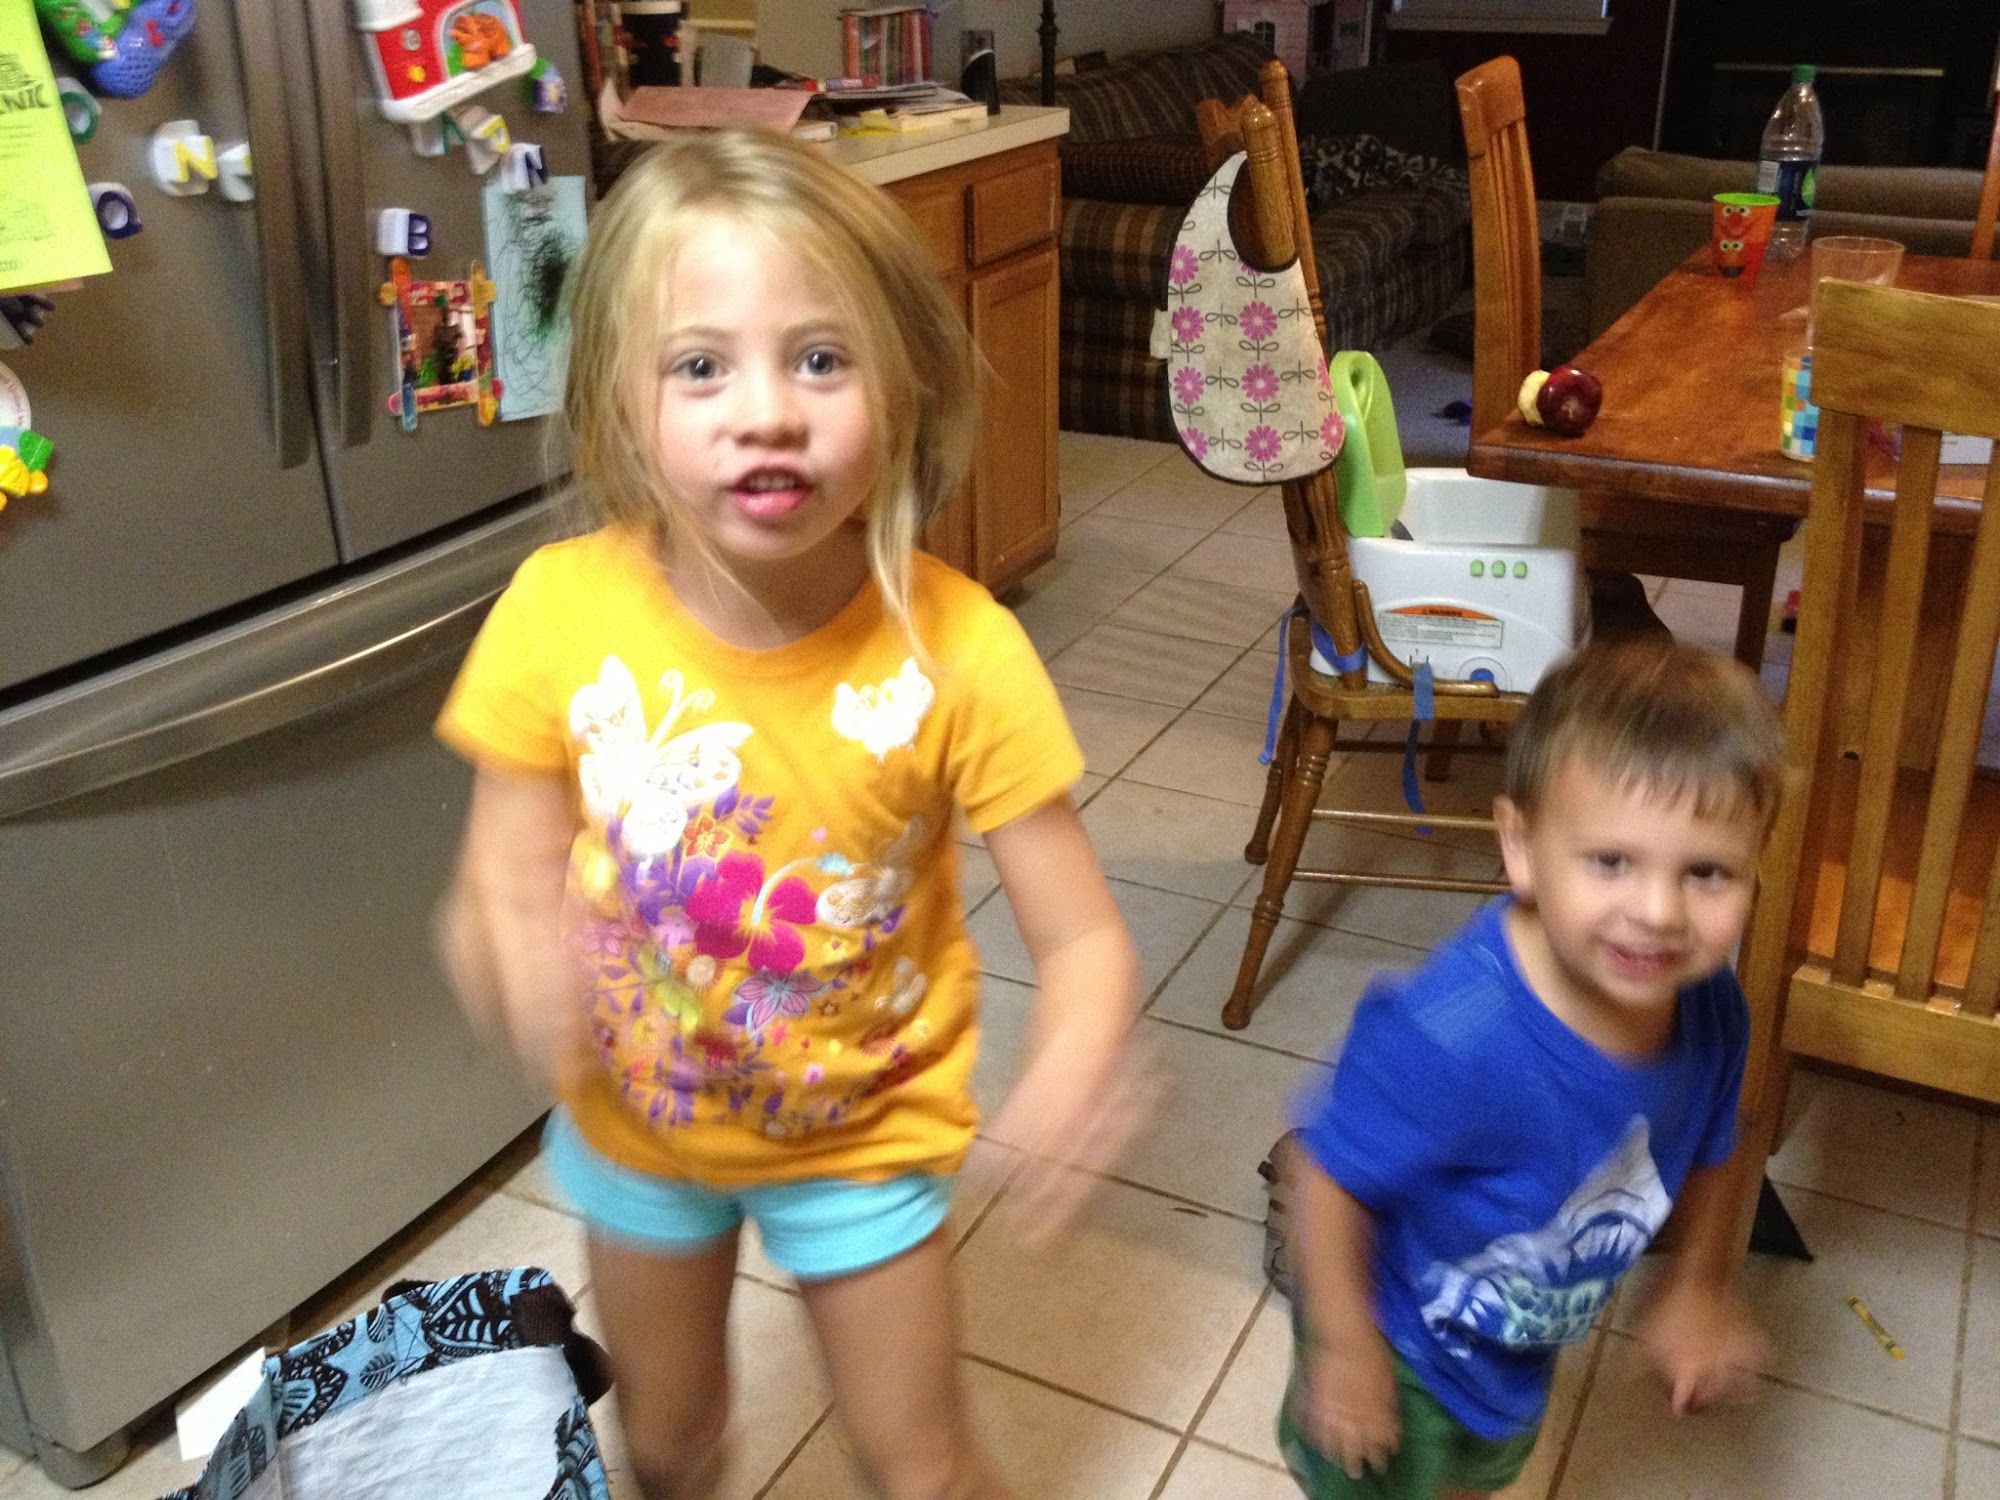  Dance party in the kitchen 